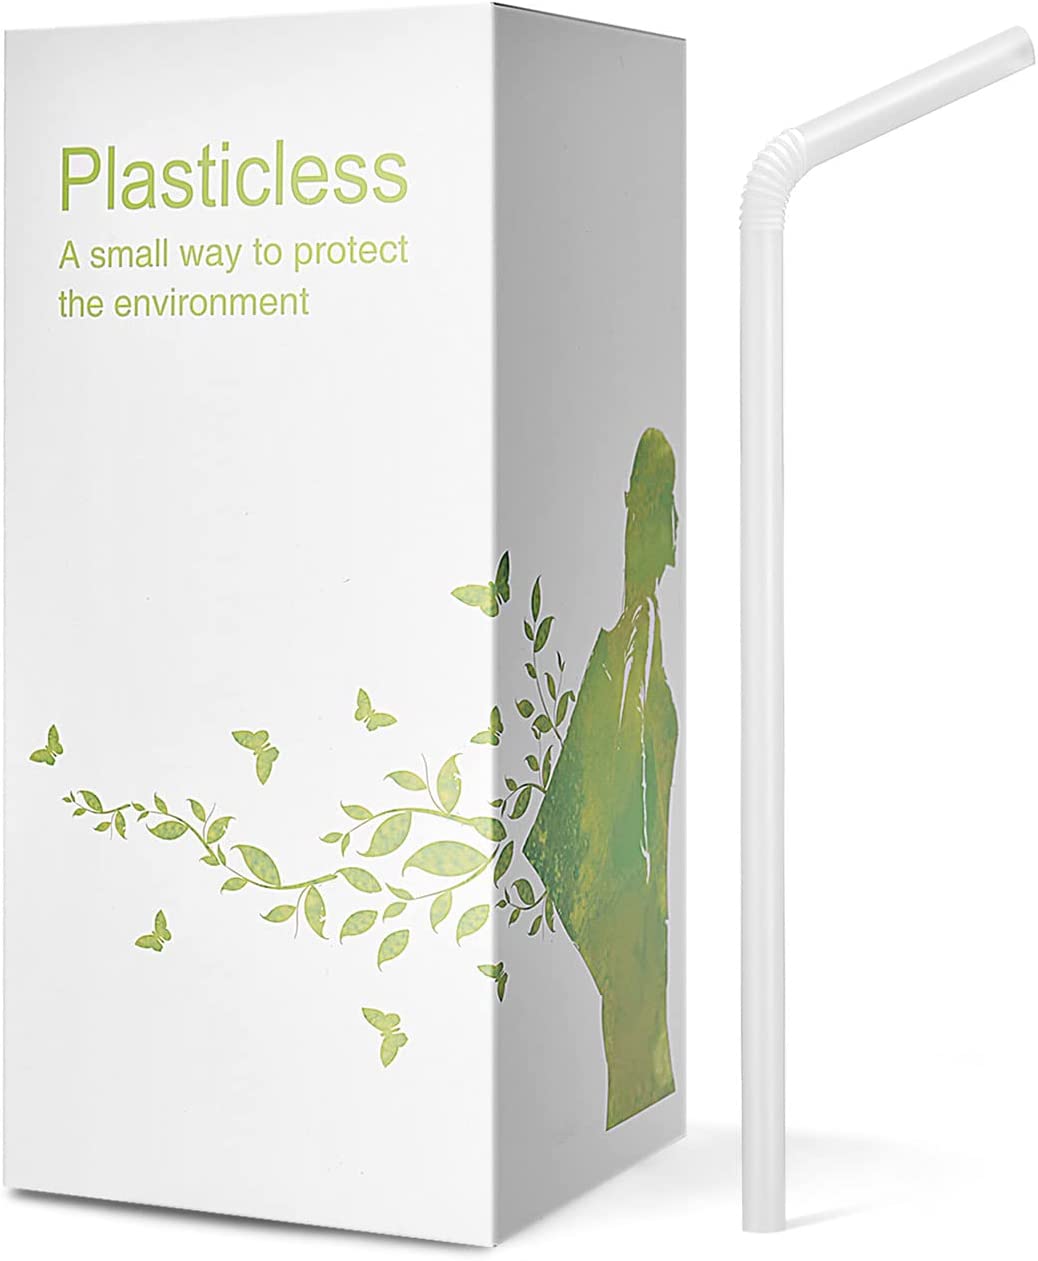 200 Count 100% Plant-Based Compostable Straws – Plasticless Biodegradable Flexible Drinking Straws – A Fantastic Eco Friendly Alternative to…